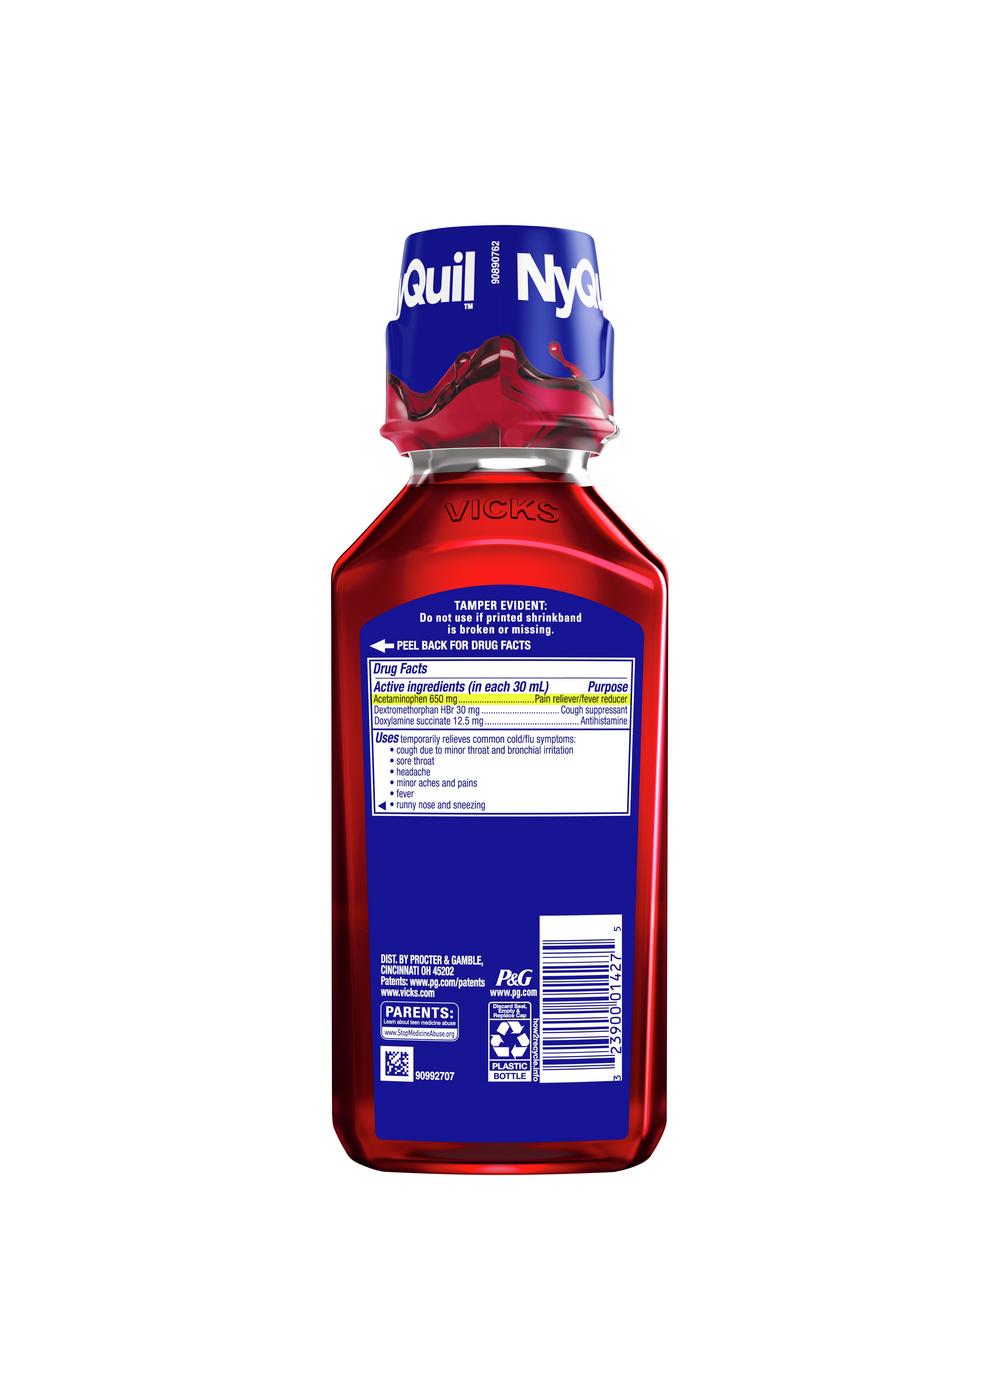 Vicks NyQuil Cold & Flu Relief Liquid - Cherry; image 8 of 9